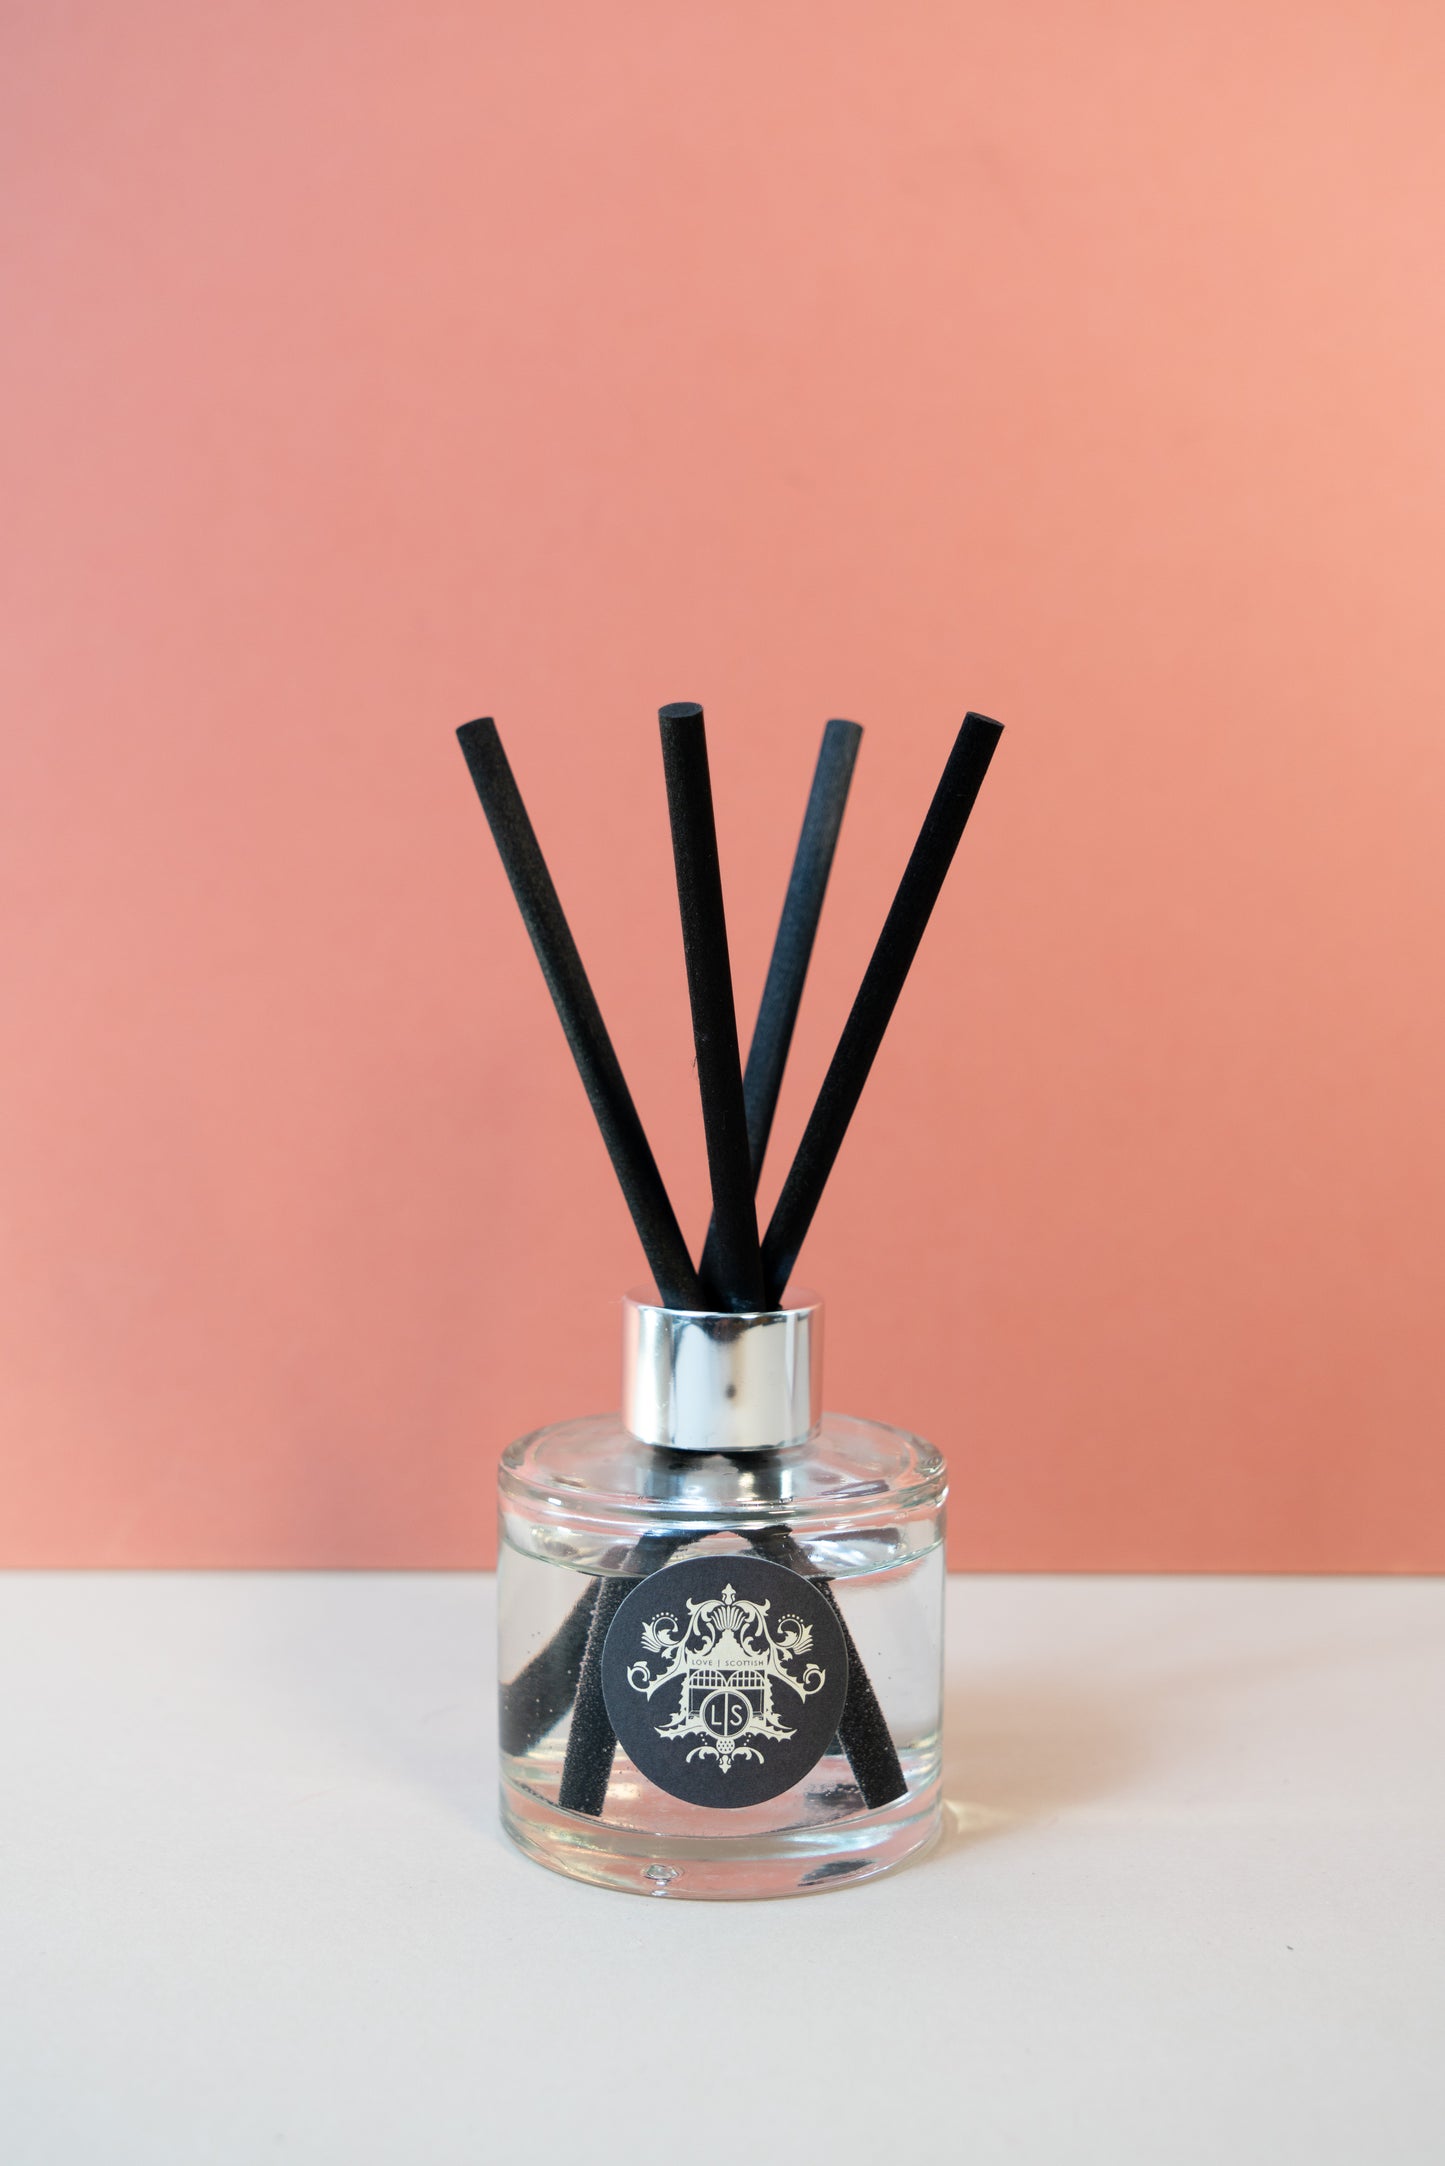 Black Pomegranate Diffuser on a Pink Background